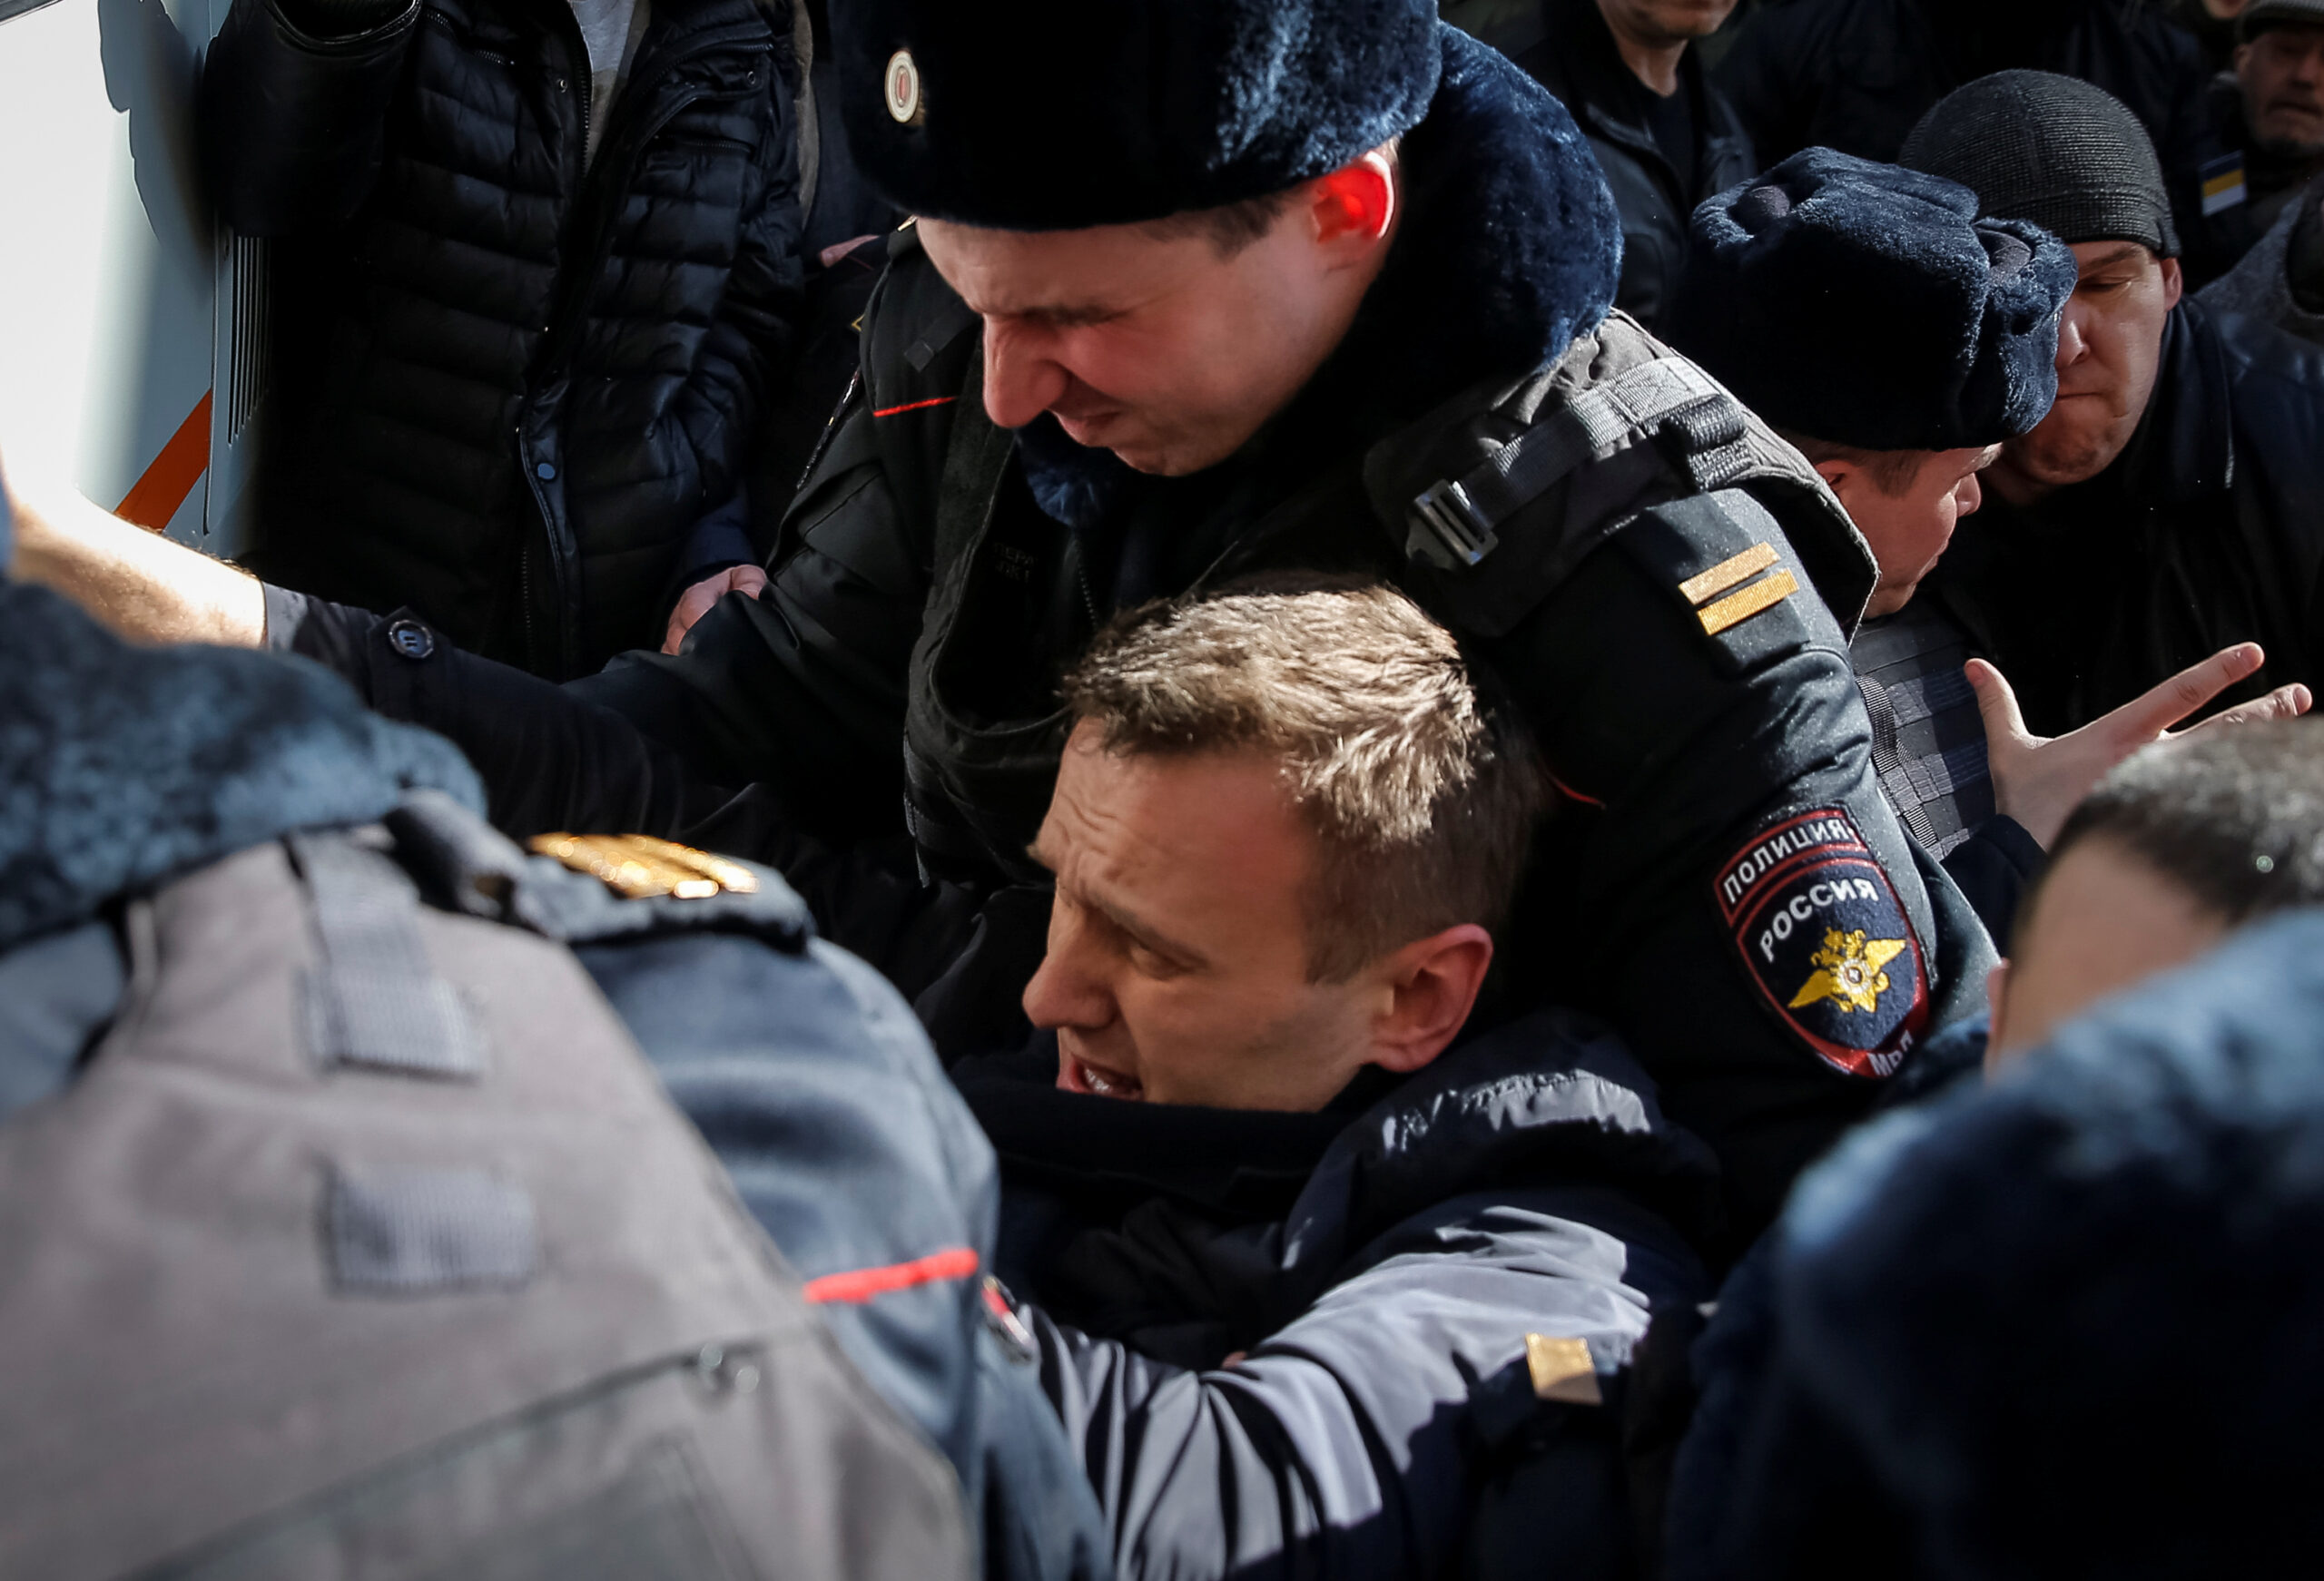 Police officers detain anti-corruption campaigner and opposition figure Alexei Navalny during a rally